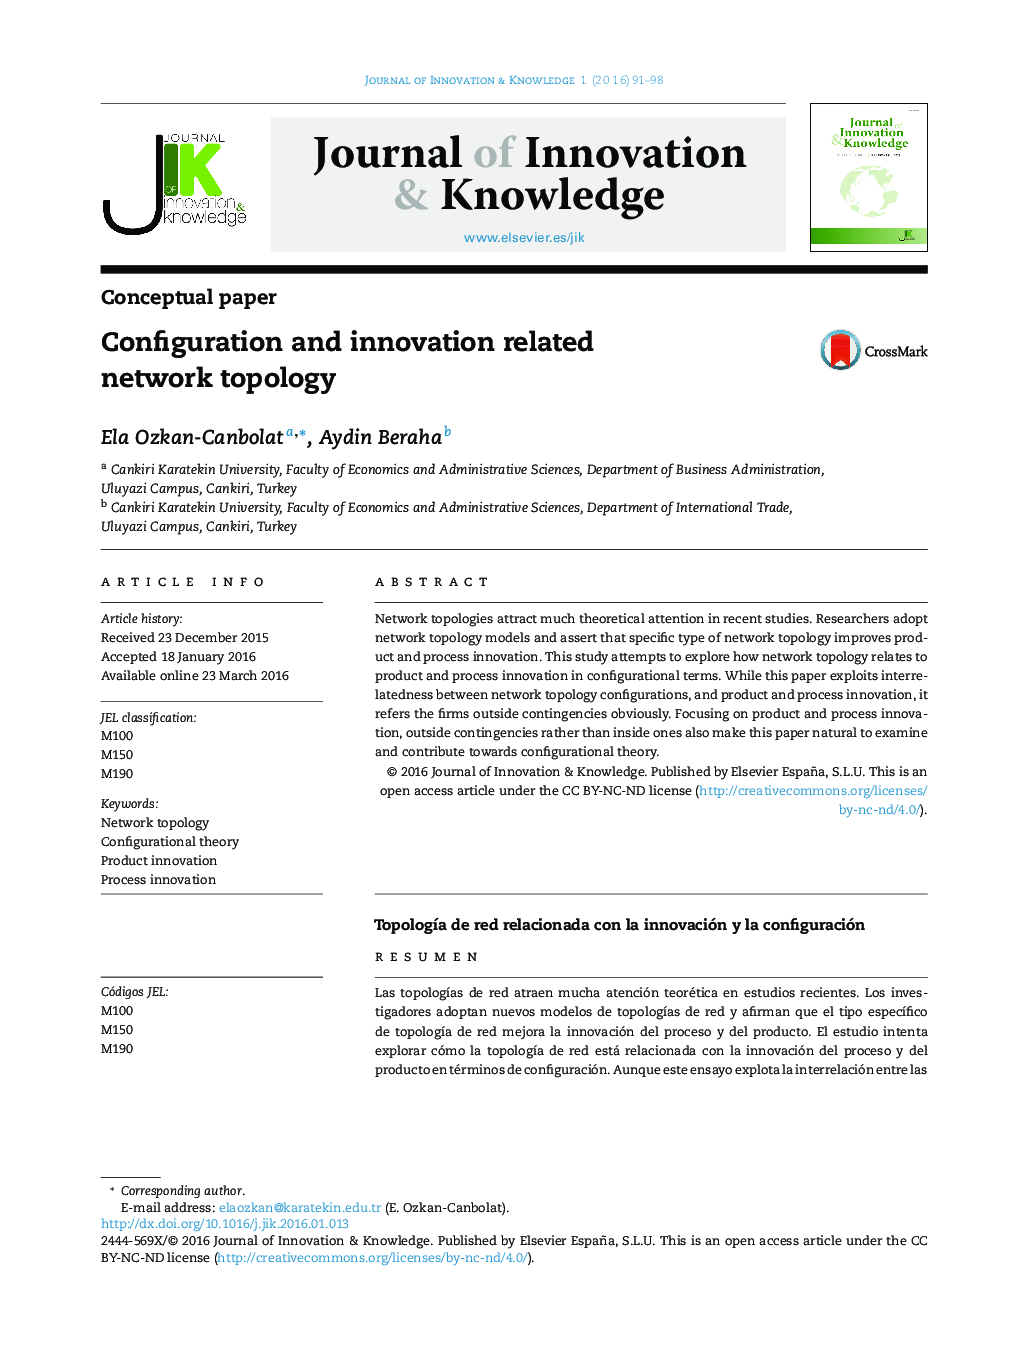 Configuration and innovation related network topology